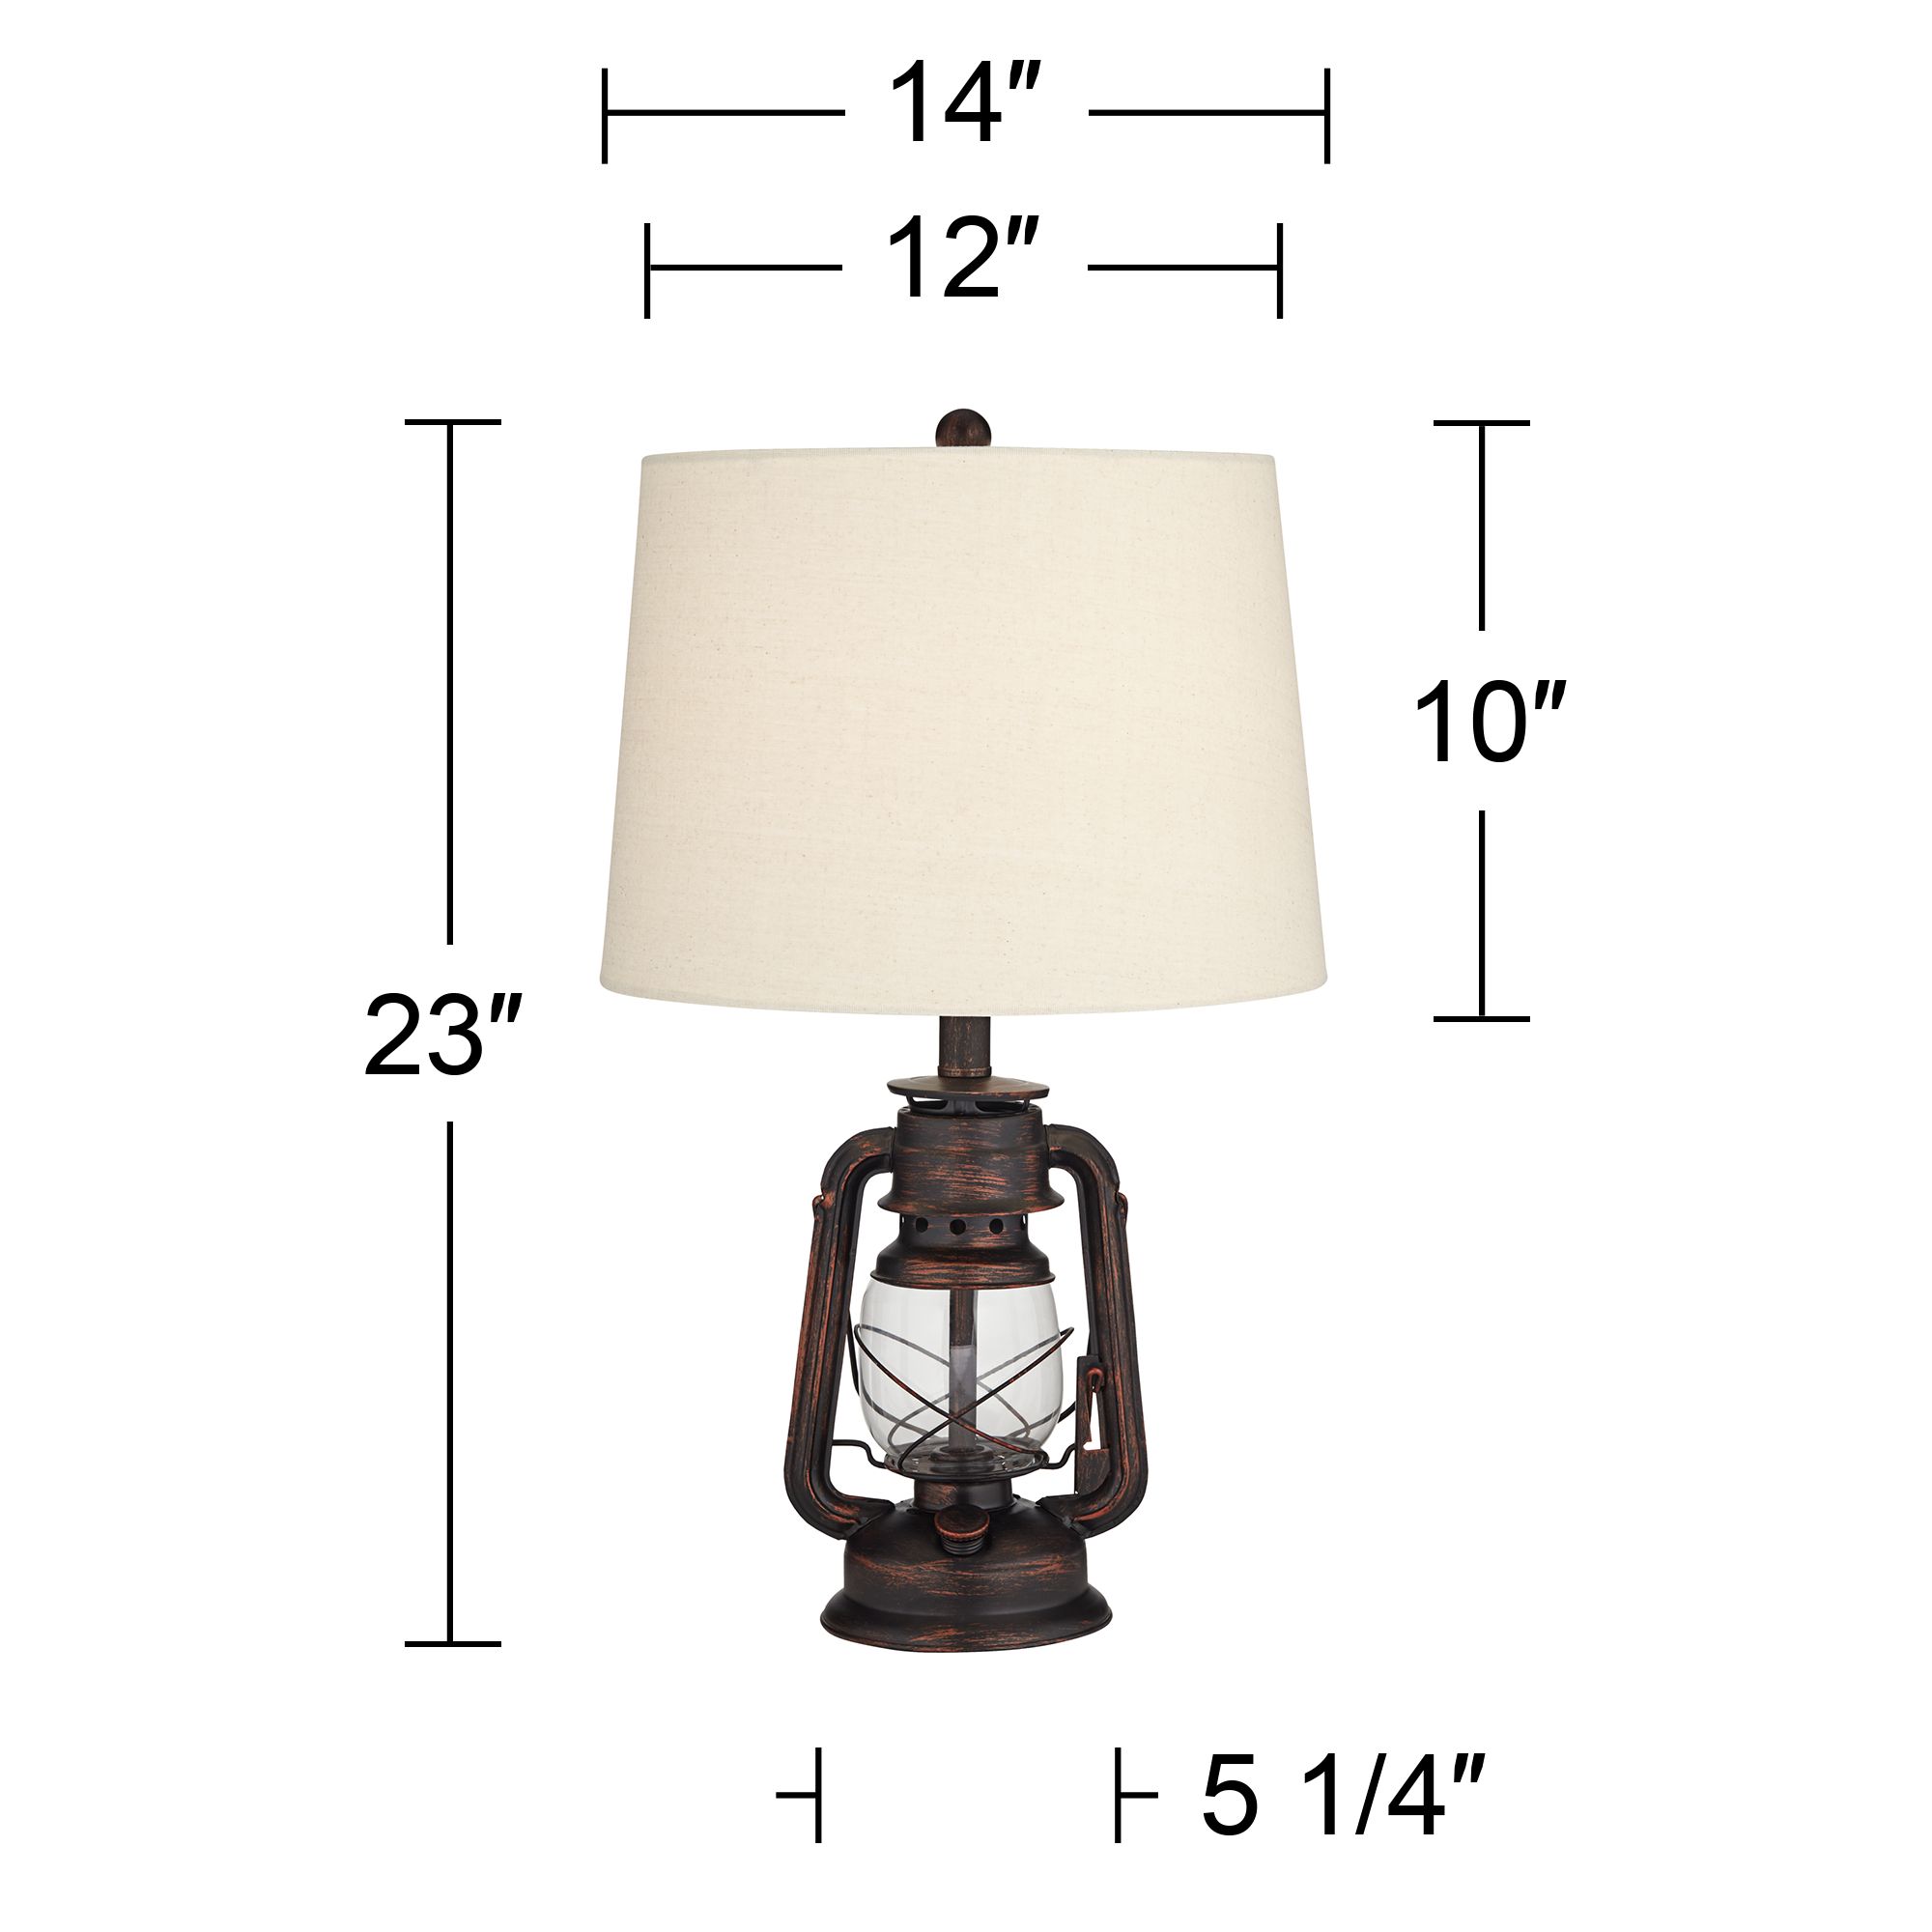 Franklin Iron Works Murphy Rustic Industrial Accent Table Lamp Miner Lantern  23